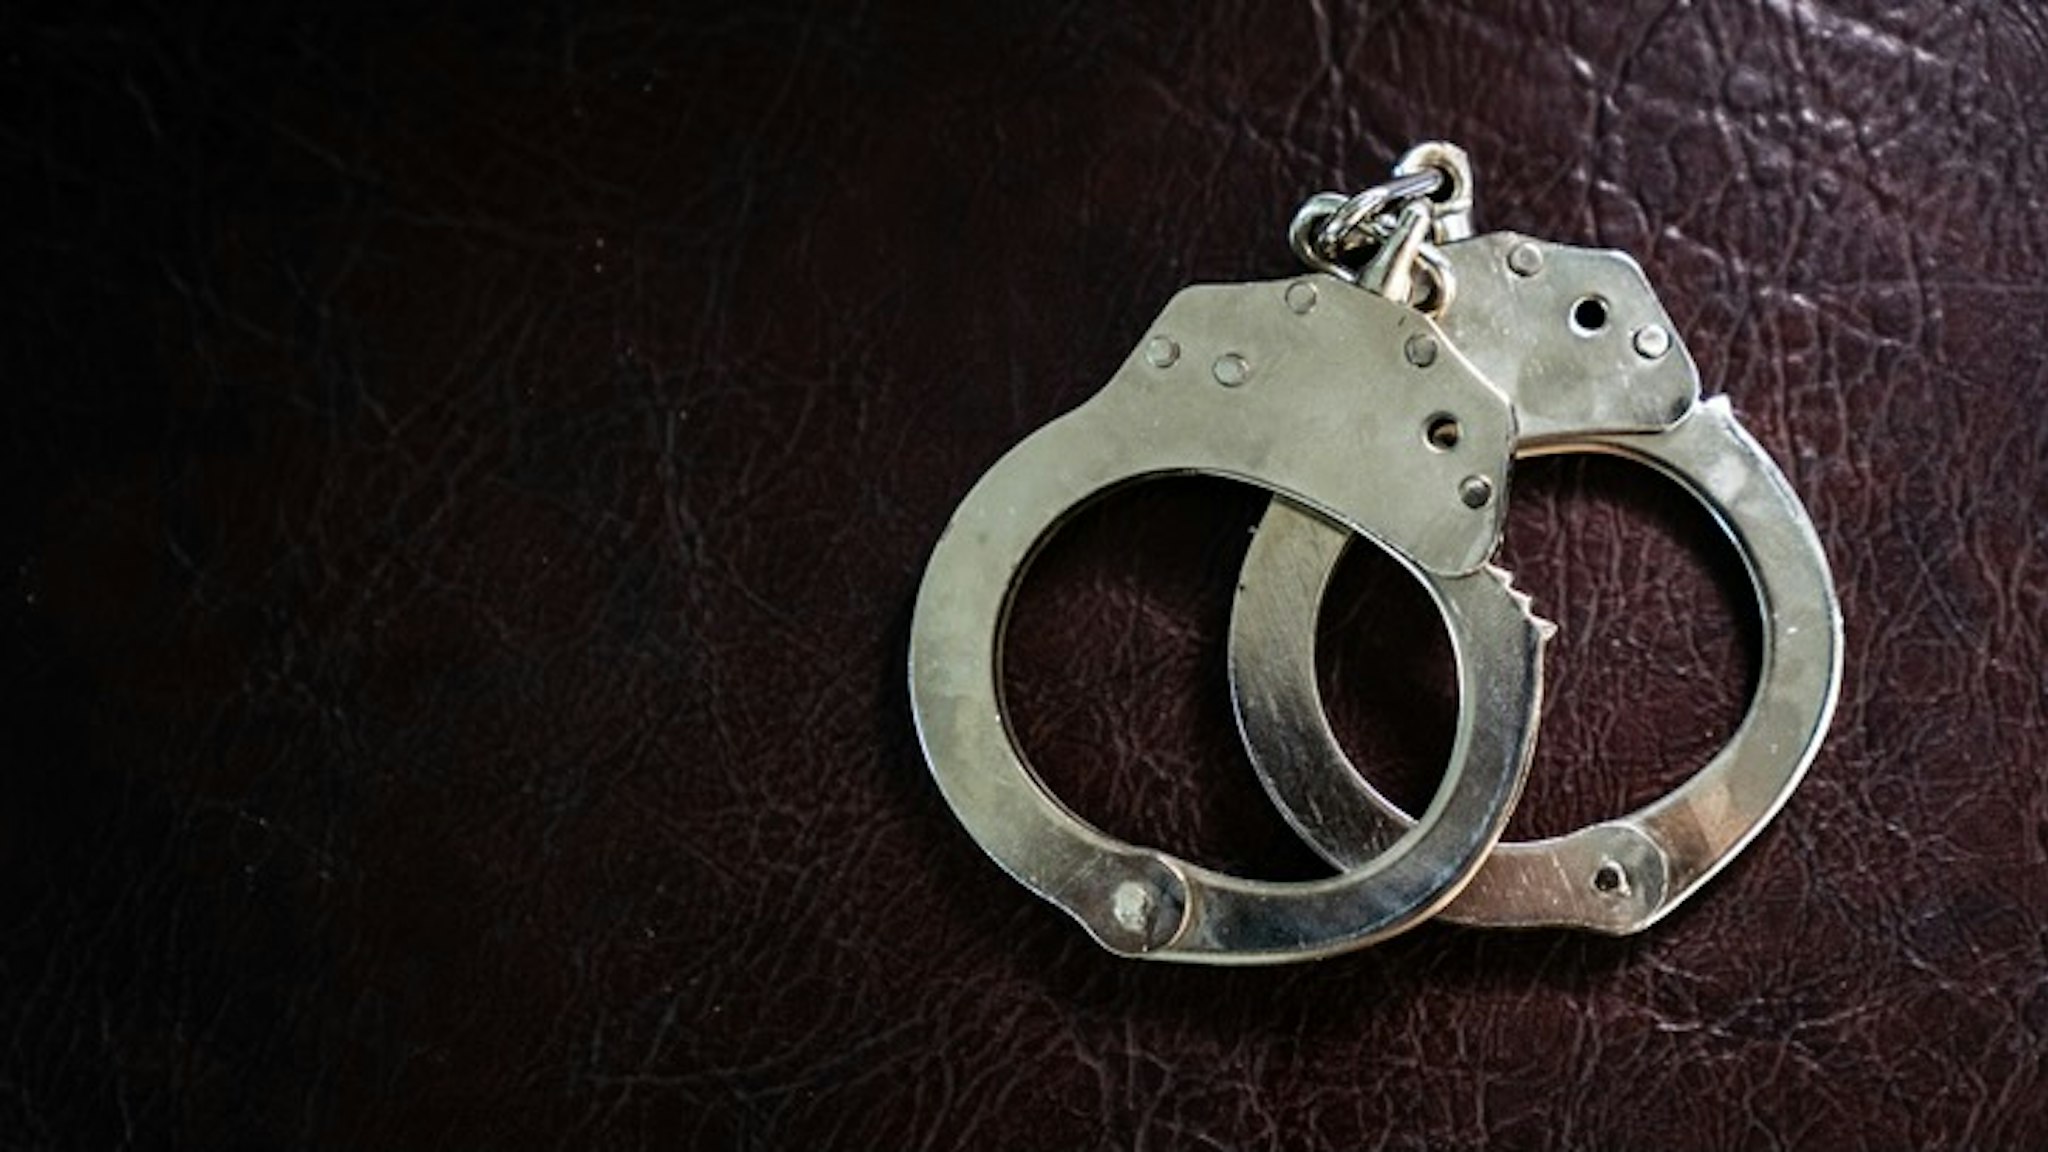 Police handcuffs,shackle - stock photo Police handcuffs,shackle krisanapong detraphiphat via Getty Images